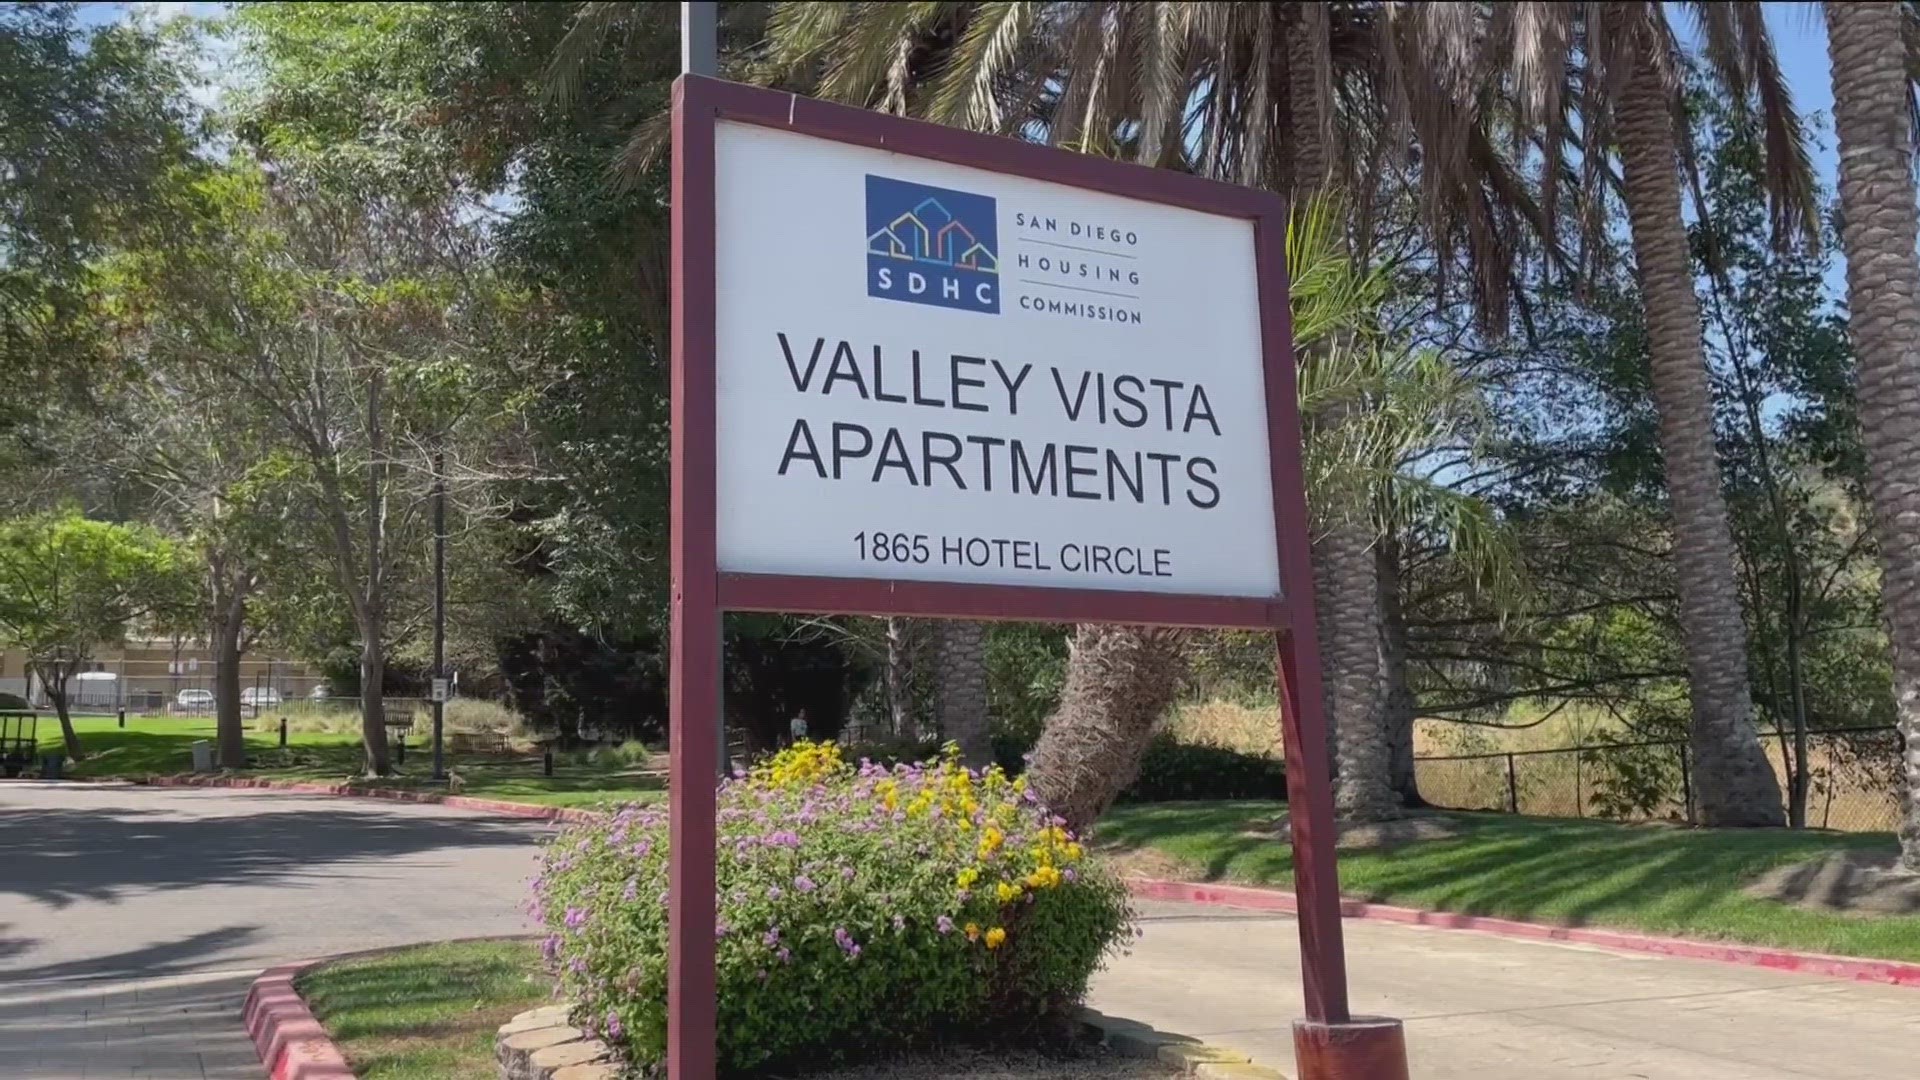 Mission Valley Apartments